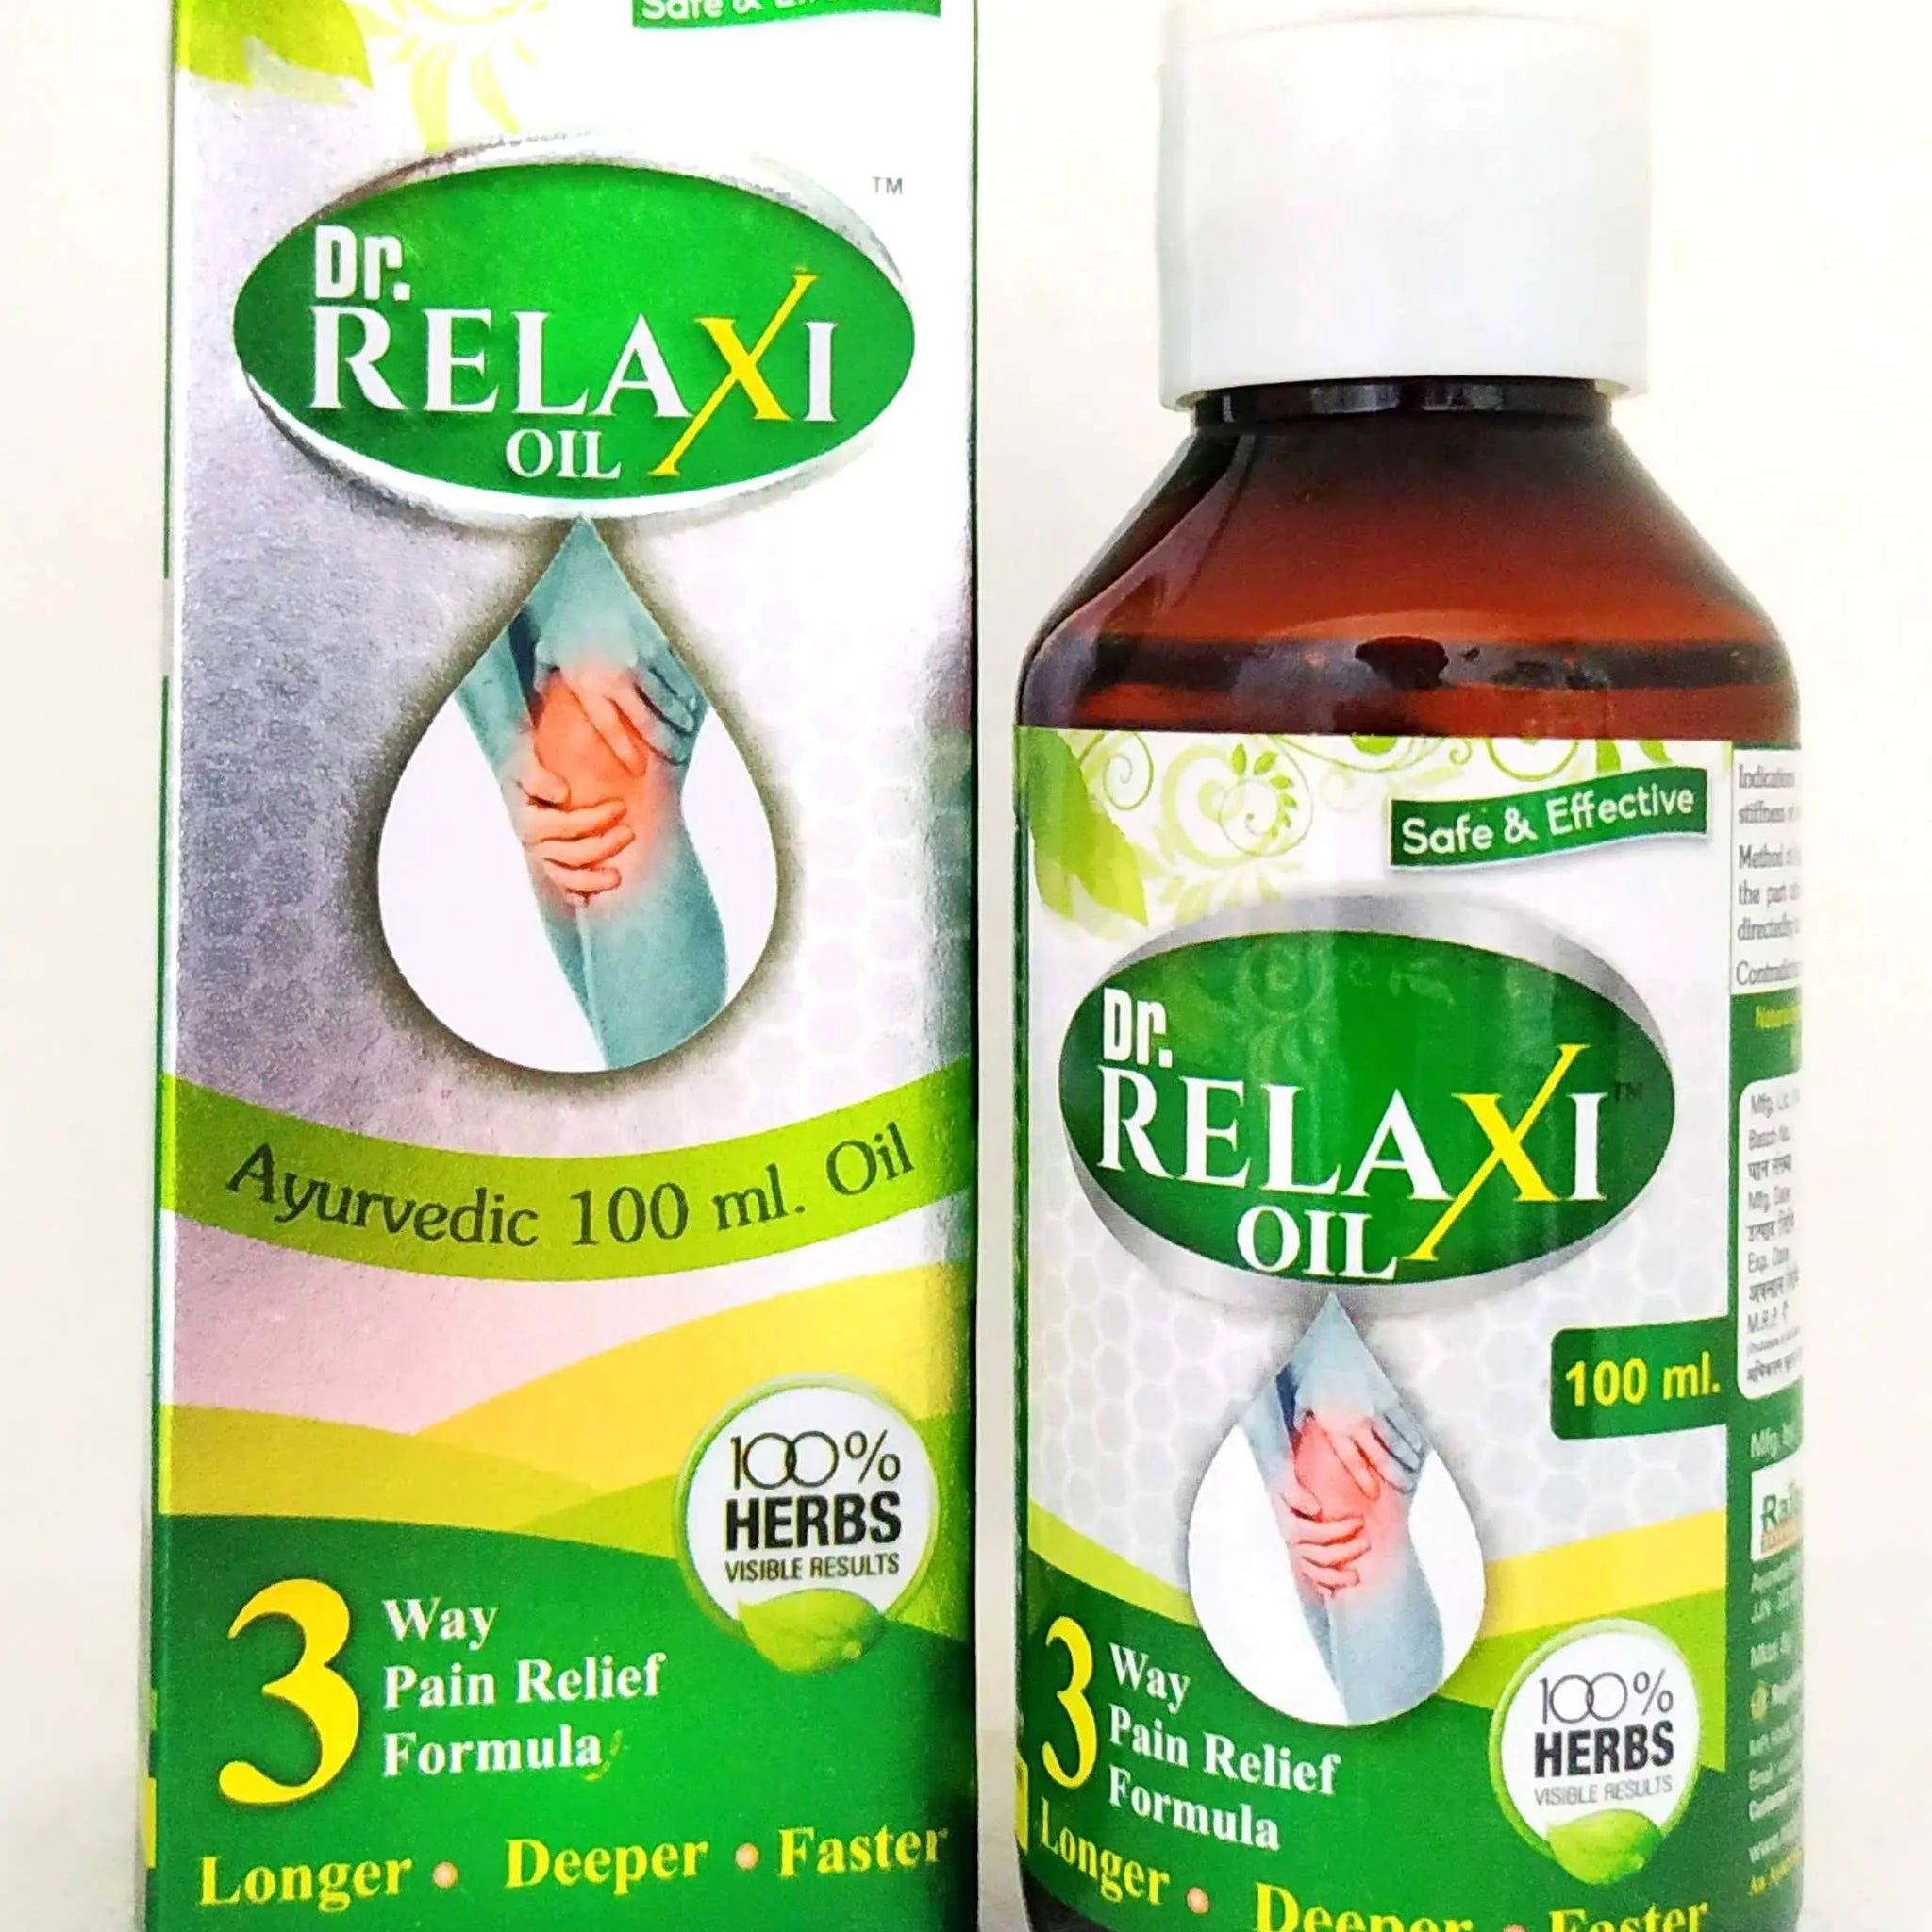 Dr.Relaxi Oil 100ml Rajasthan Herbals